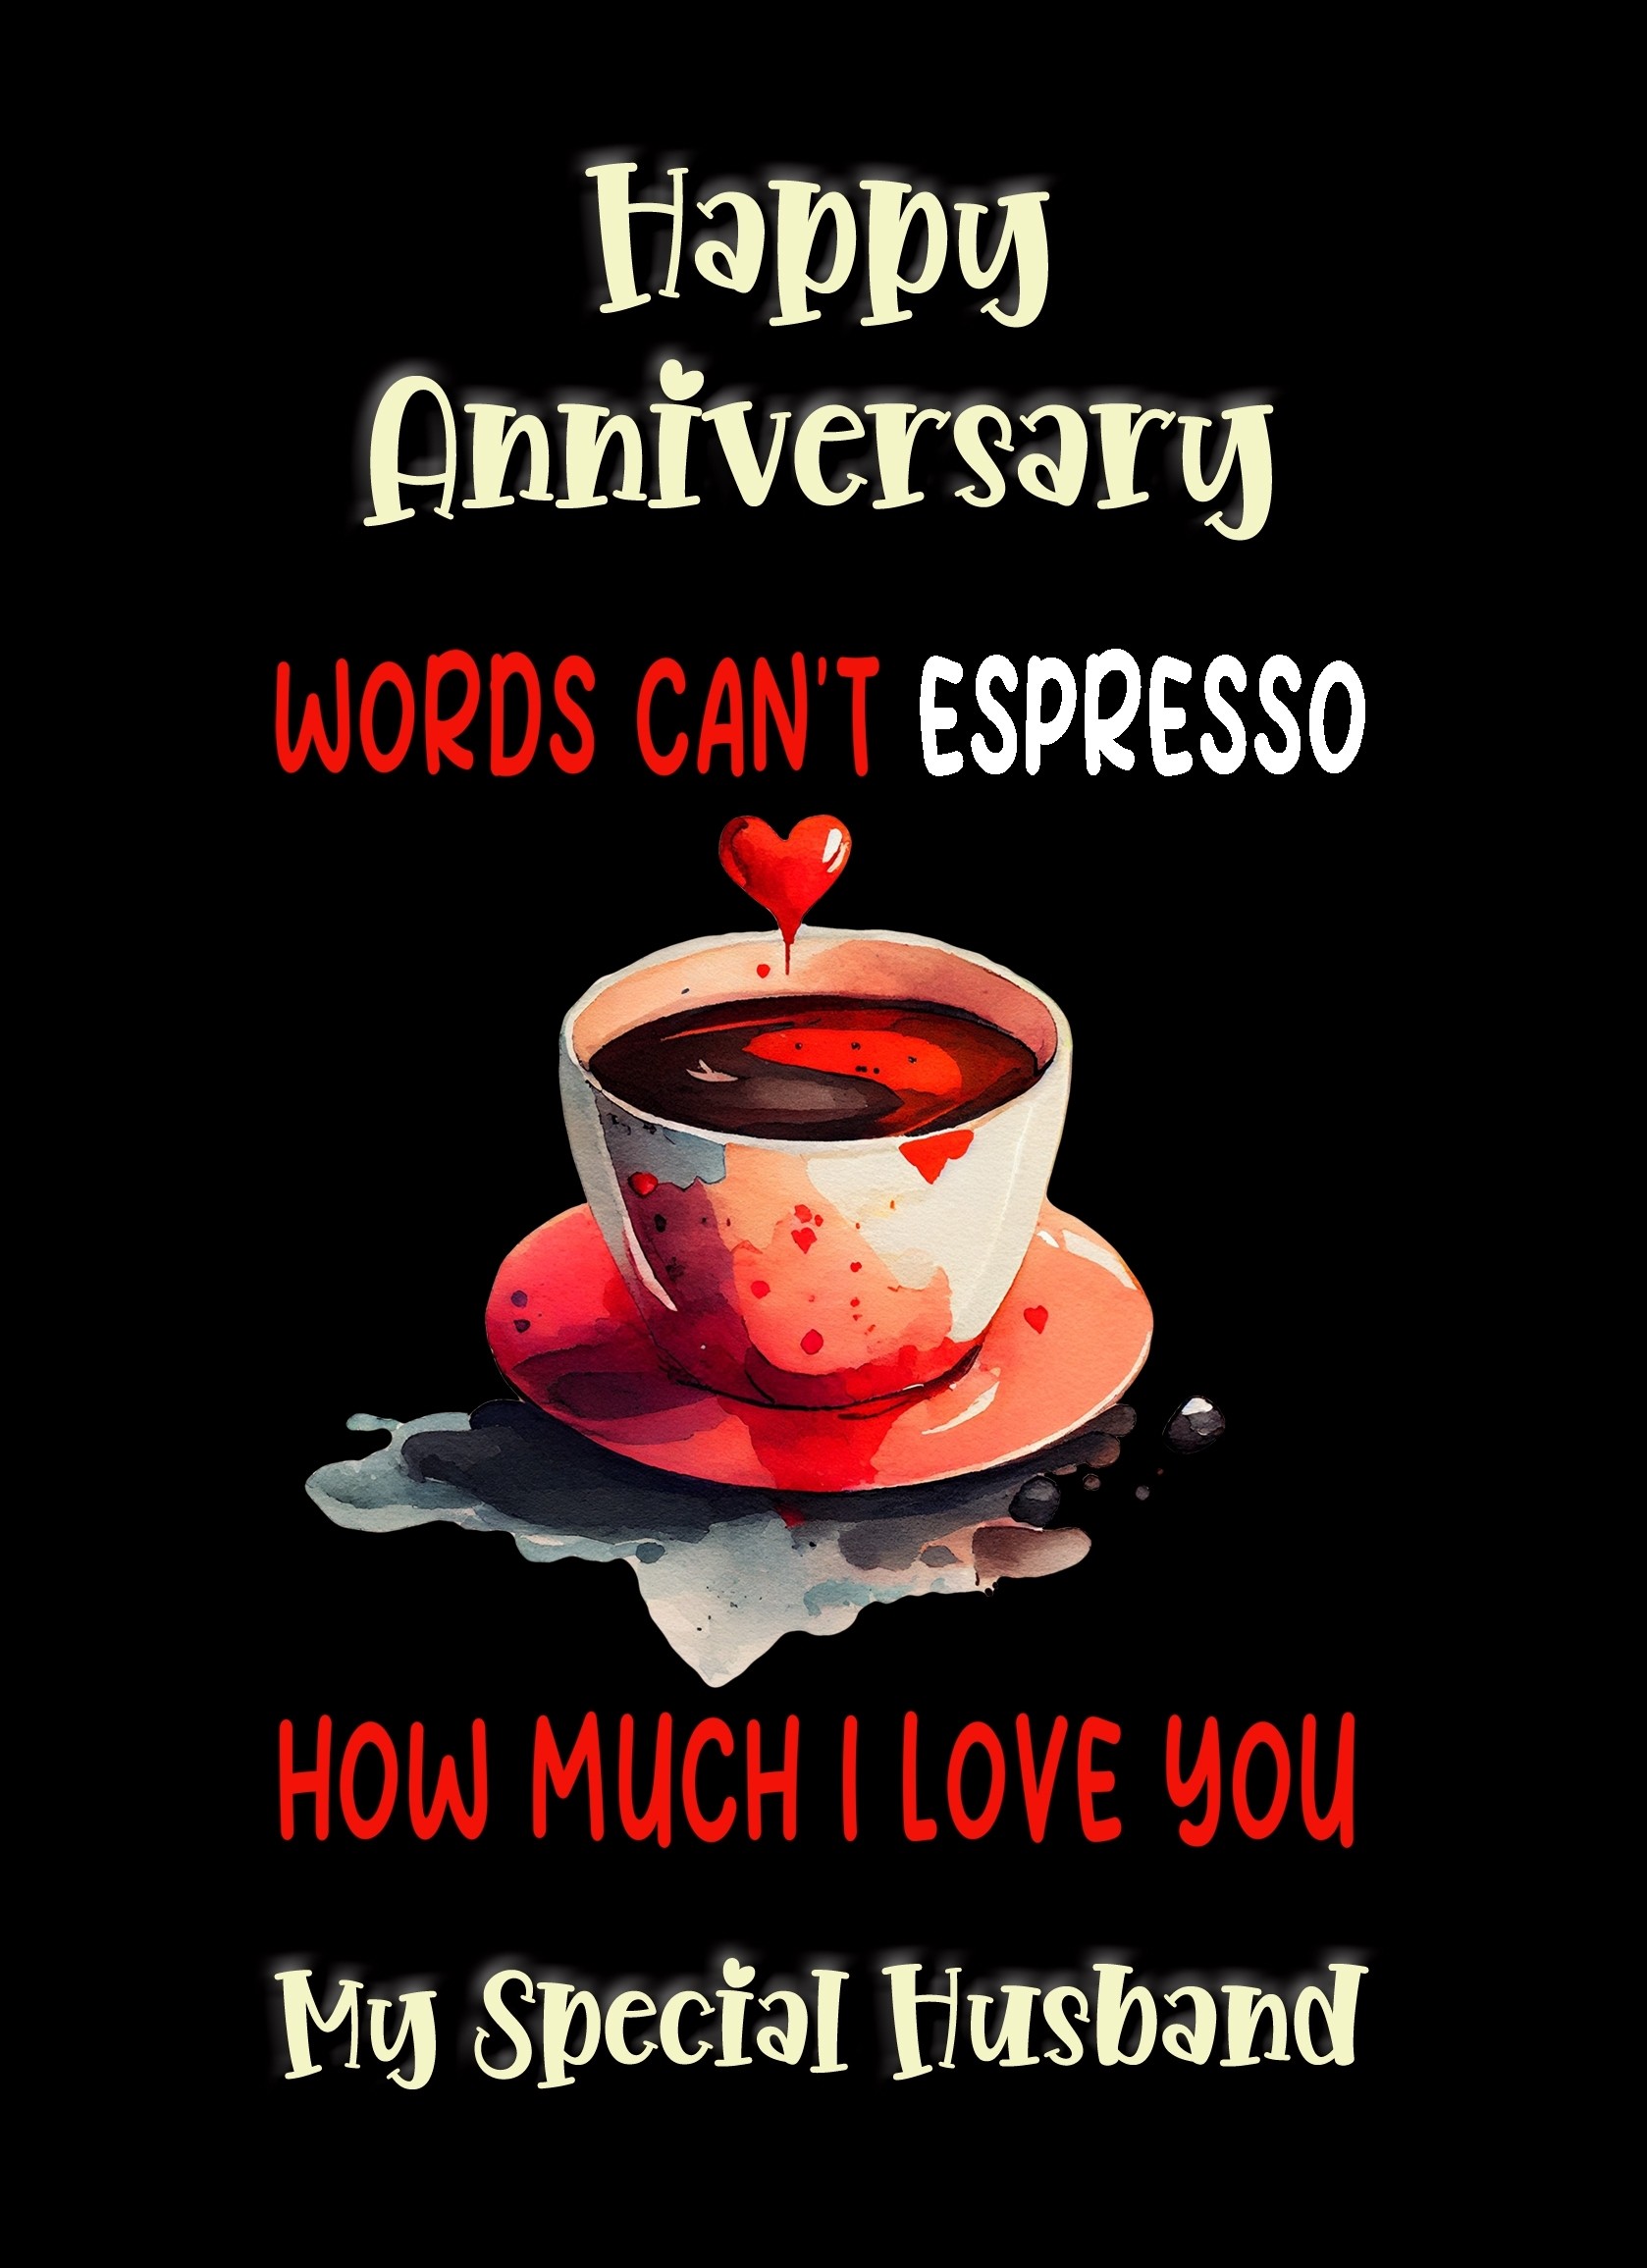 Funny Pun Romantic Anniversary Card for Husband (Can't Espresso)